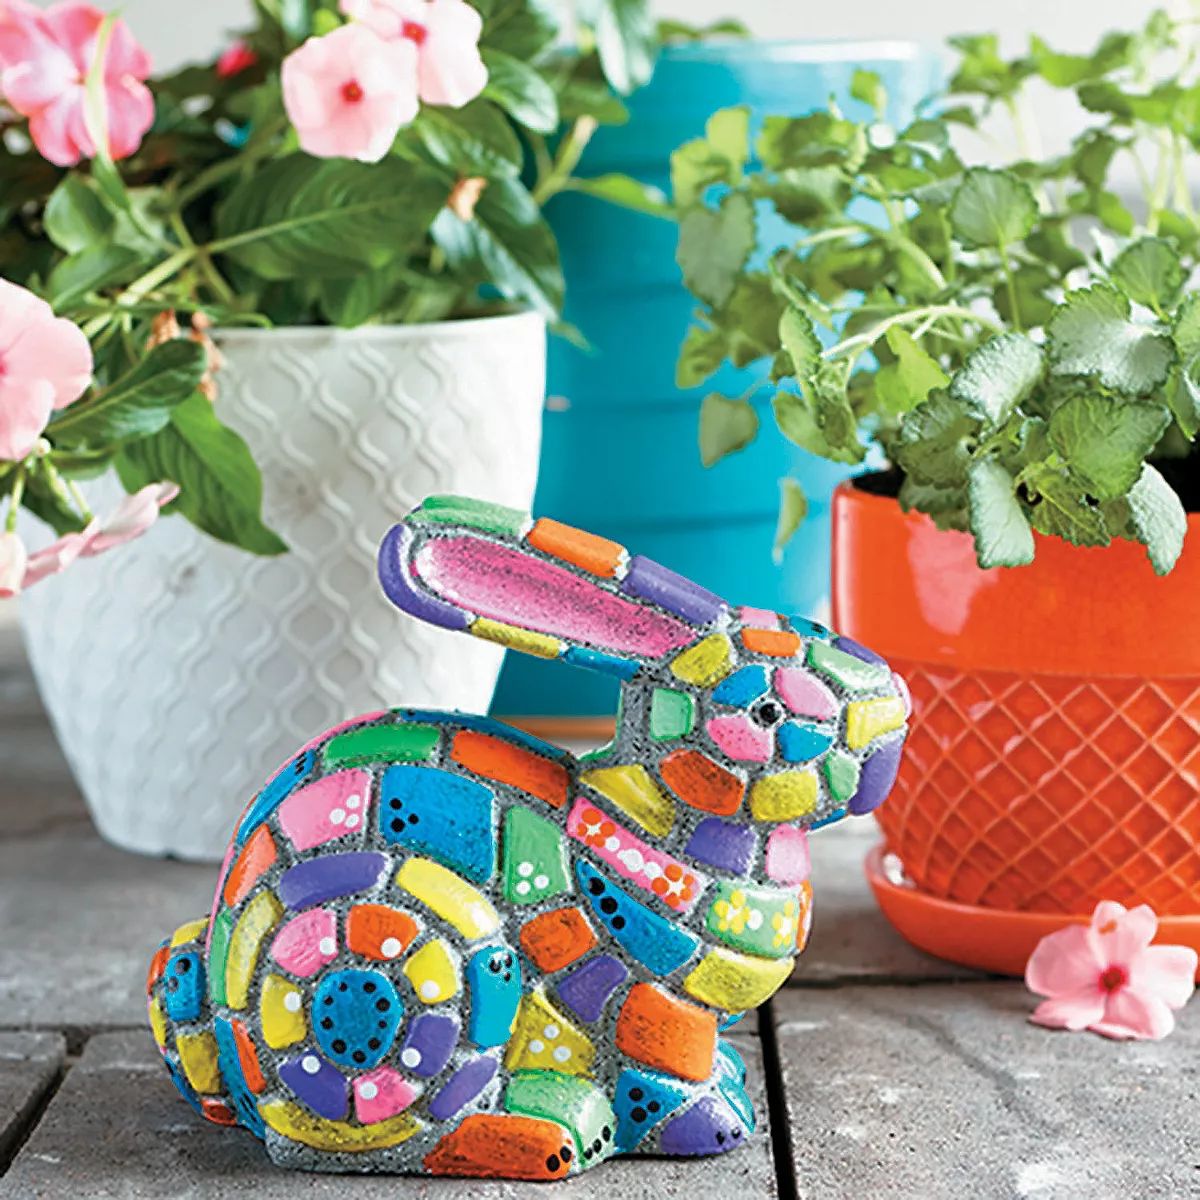 Paint Your Own Stone: Mosaic Bunny | Target